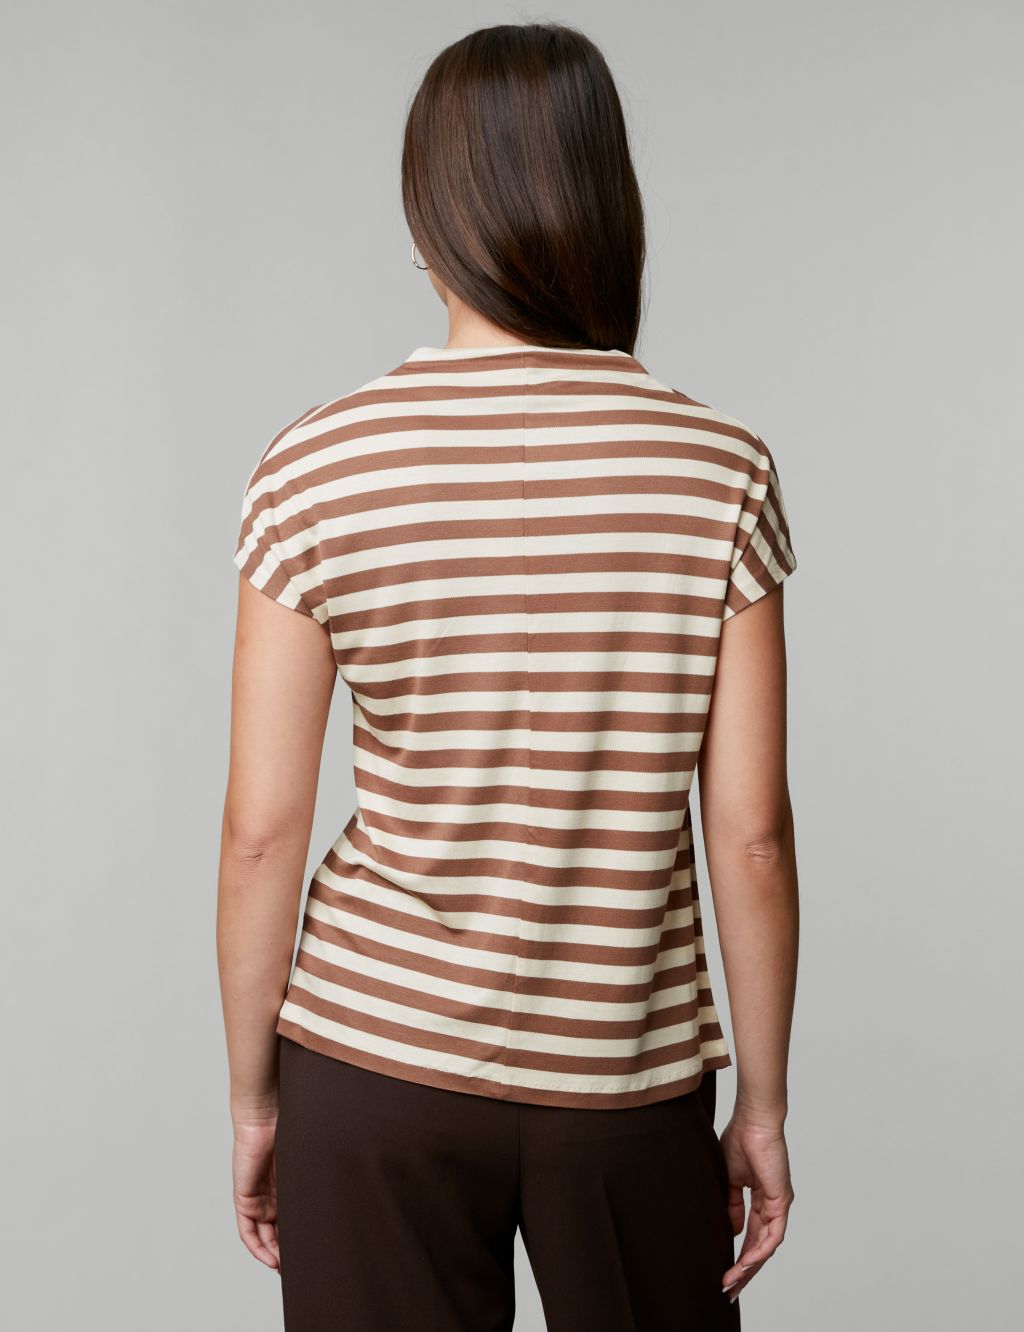 Jersey Striped Top image 5